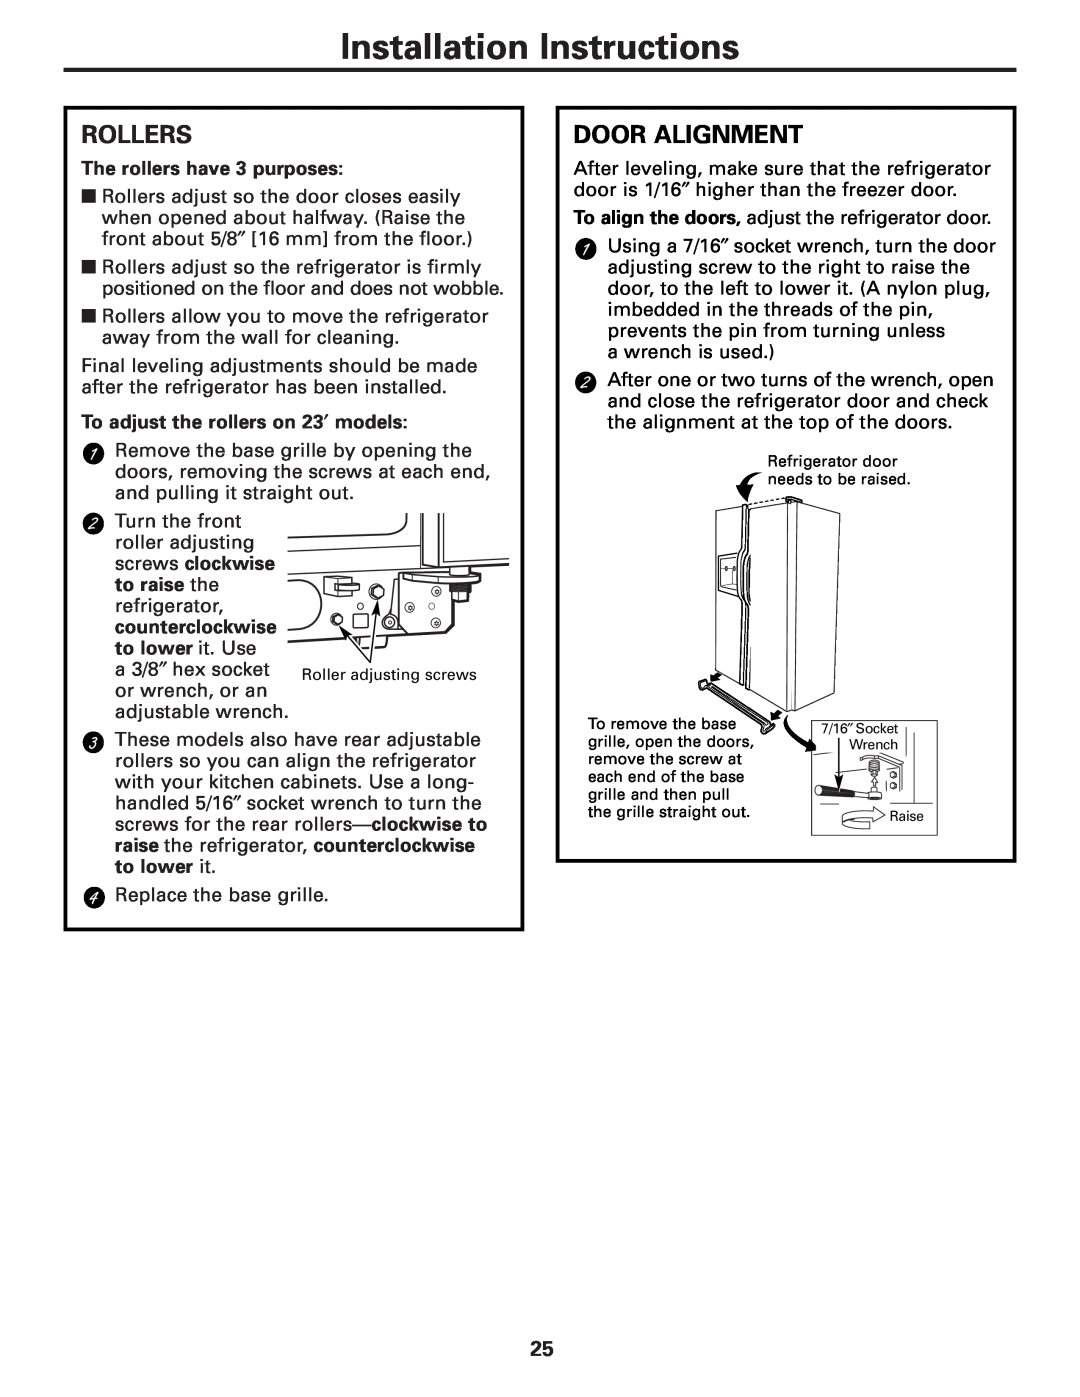 Hotpoint 23 operating instructions Installation Instructions, Rollers, Door Alignment, The rollers have 3 purposes 